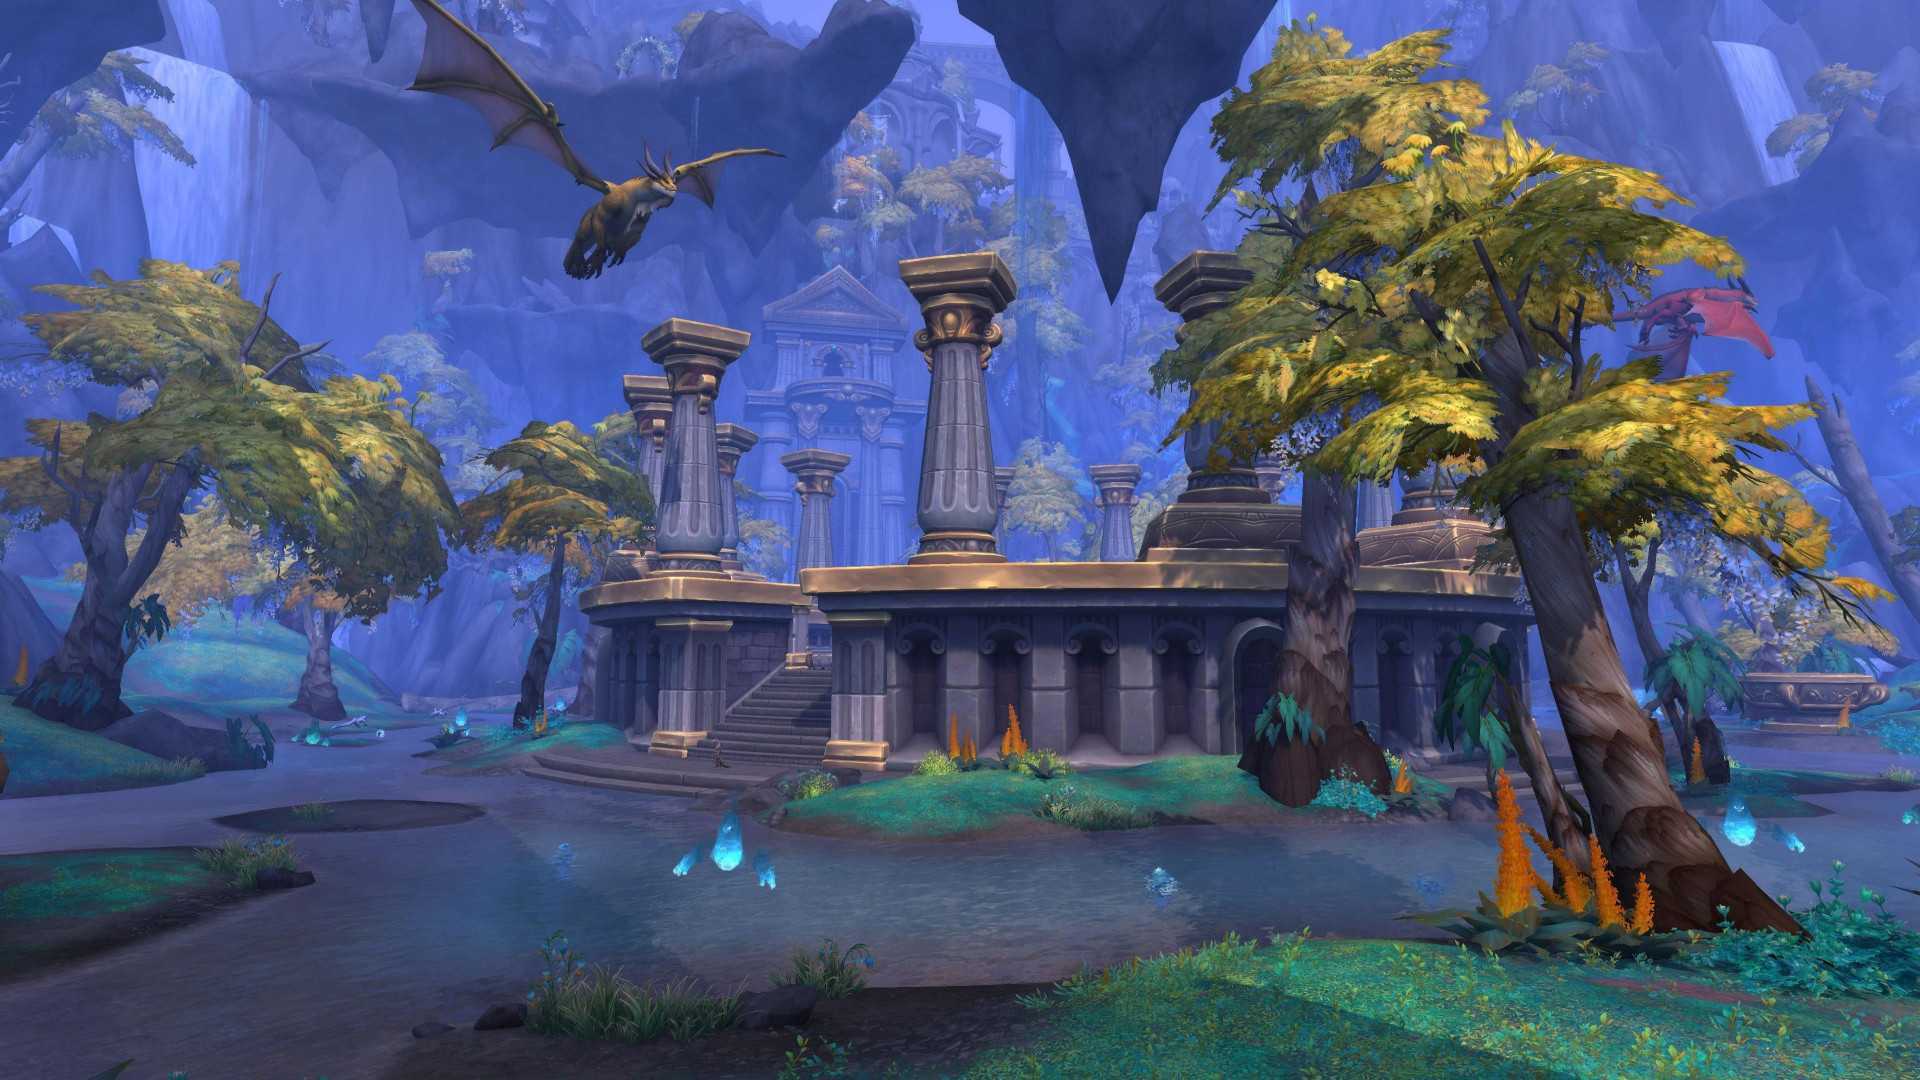 Dragonflight alchemy leveling 1 - 100 guide - guides - wowhead